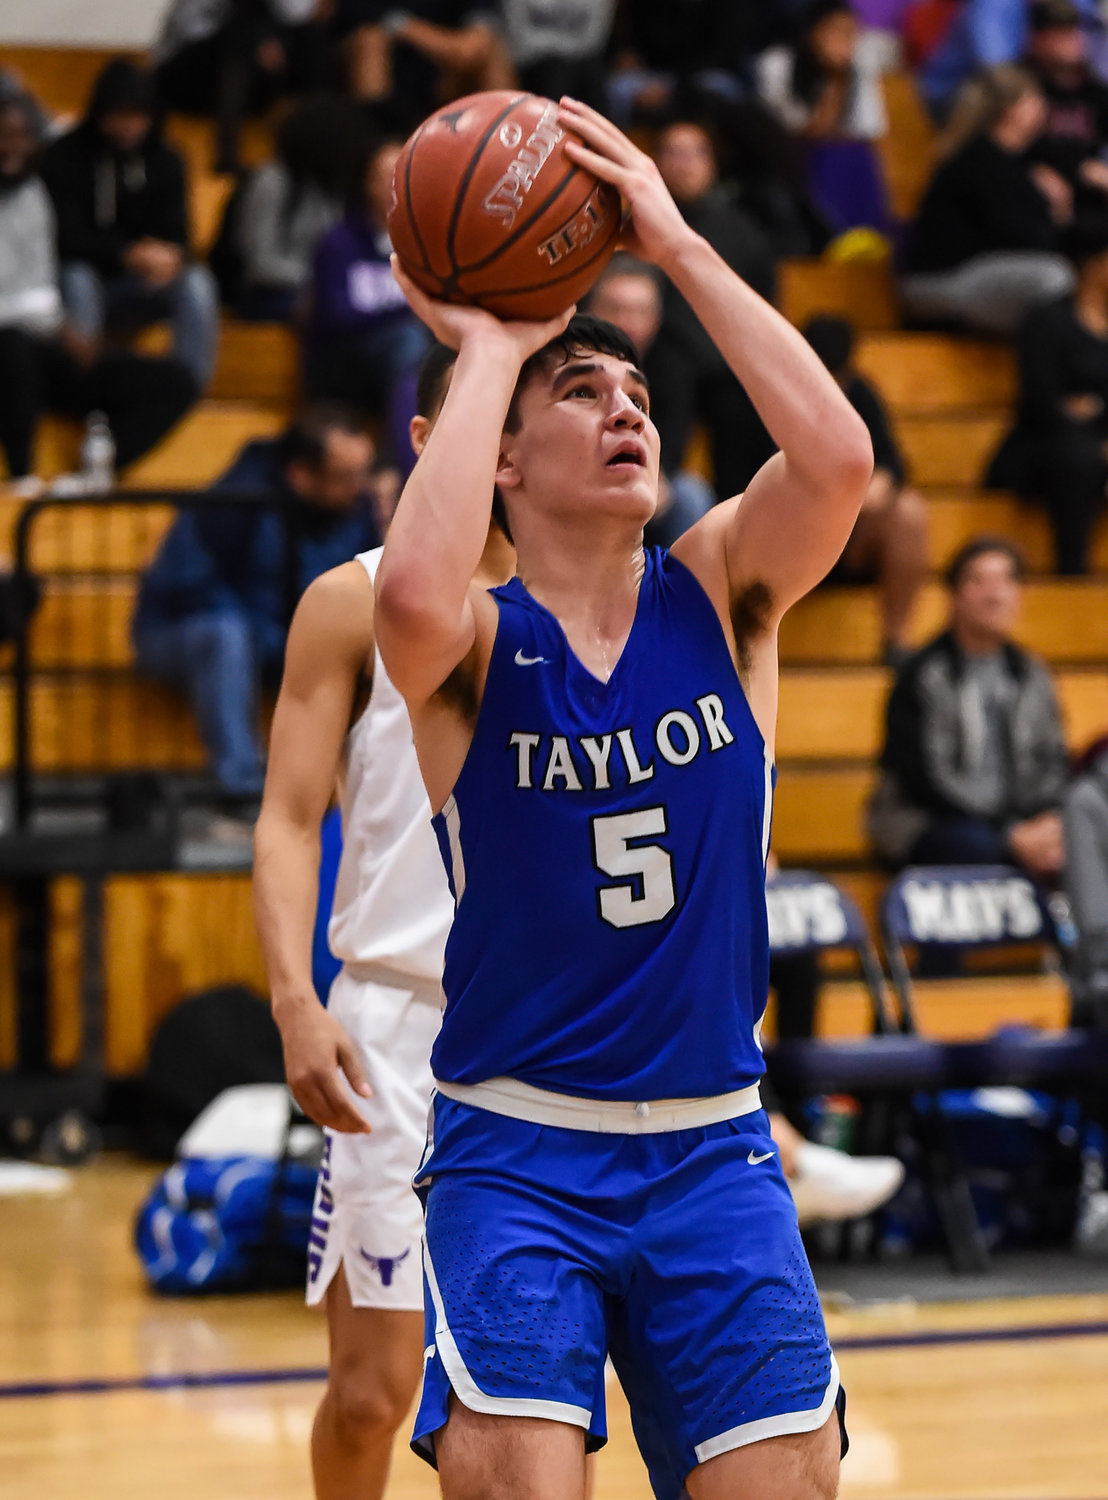 Taylor senior guard Jake Arnold, who finished in the top five in scoring in the Greater Houston area last season, verbally committed to Houston Baptist on Oct. 16.